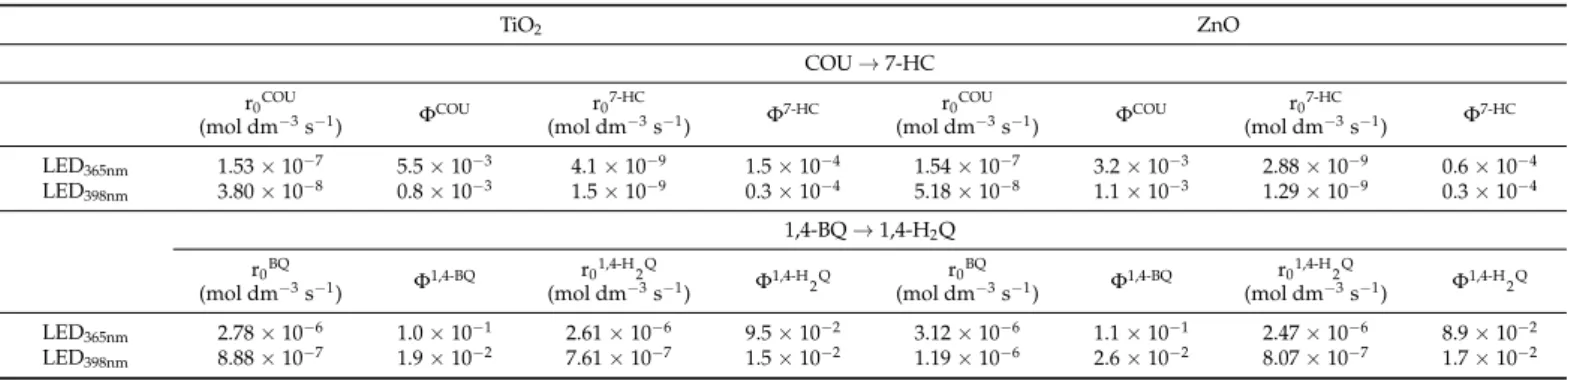 Table 2. The initial transformation rates of target substances (r 0 COU and r 0 1,4-BQ ), the initial formation rate of their primary products (r 0 7-HC and r 0 1,4-H2Q ), and the apparent quantum efficiency (Φ) of the related processes